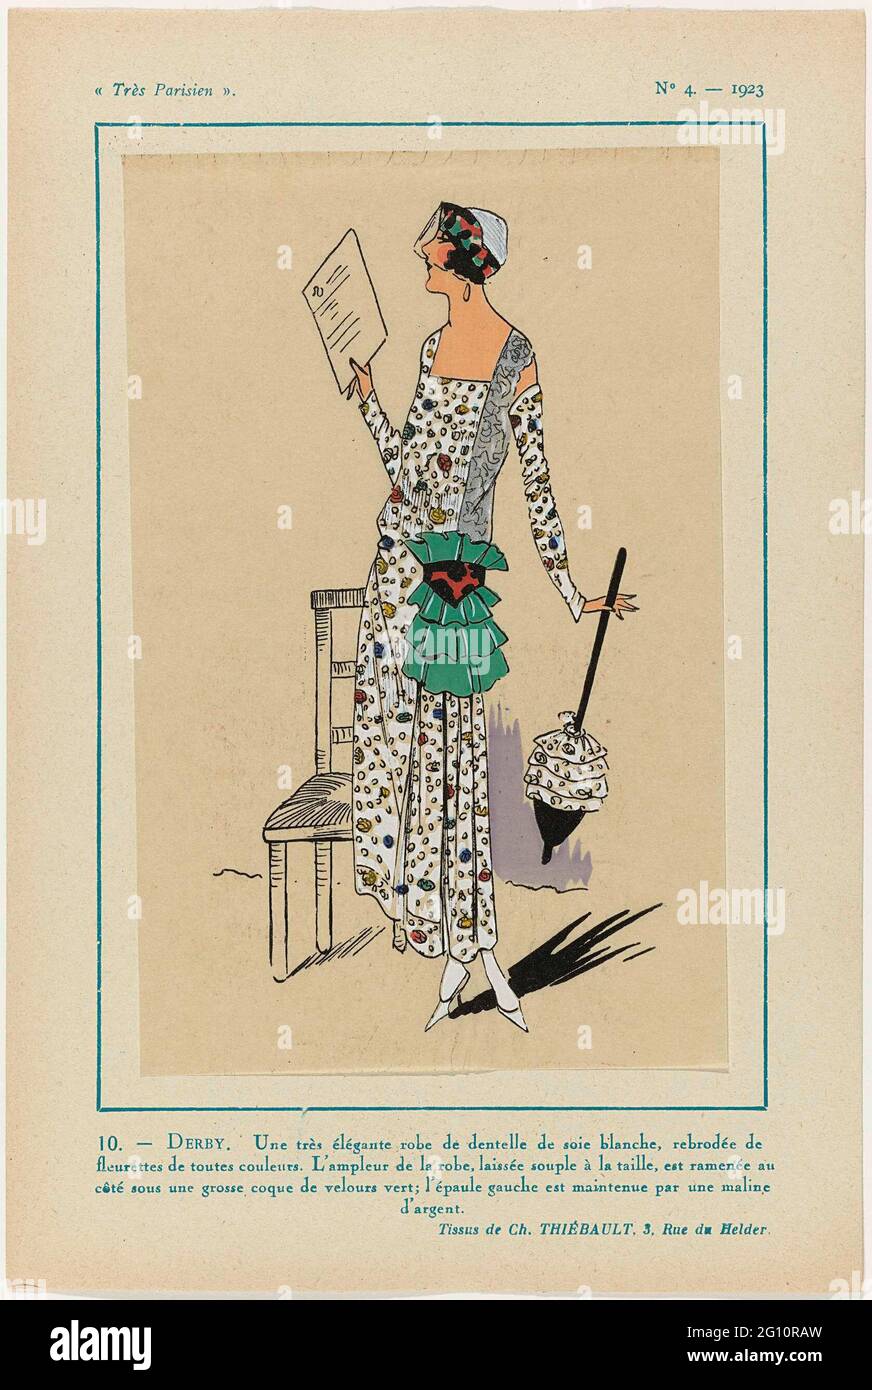 Très Parisien, 1923, No. 4: 10. -DERBY. Une très élégante Robe .... Dress from white silk side with embroidered floral pattern in different colors. At the waist on the left a large 'coque' of green velvet; The left shoulder strap is held by silver-colored Maline (Mechelen side?). Further accessories: Hat with raised edge and voile, parasol, pumps. Substances from CH. Thiébault. Print from the fashion magazine Très Parisien (1920-1936). Stock Photo